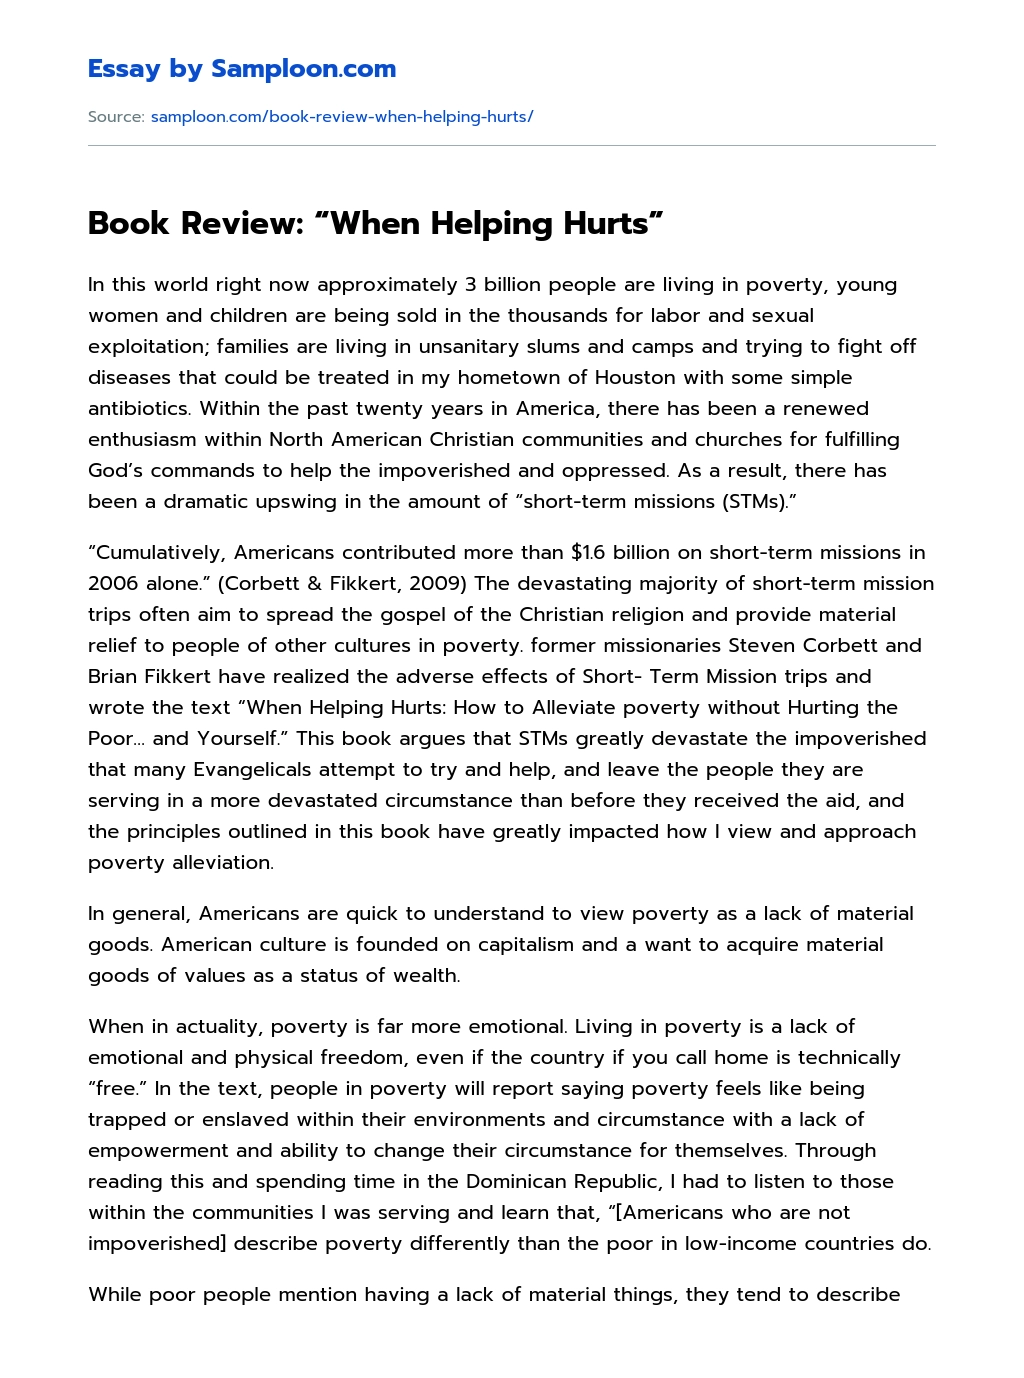 Book Review: “When Helping Hurts” essay